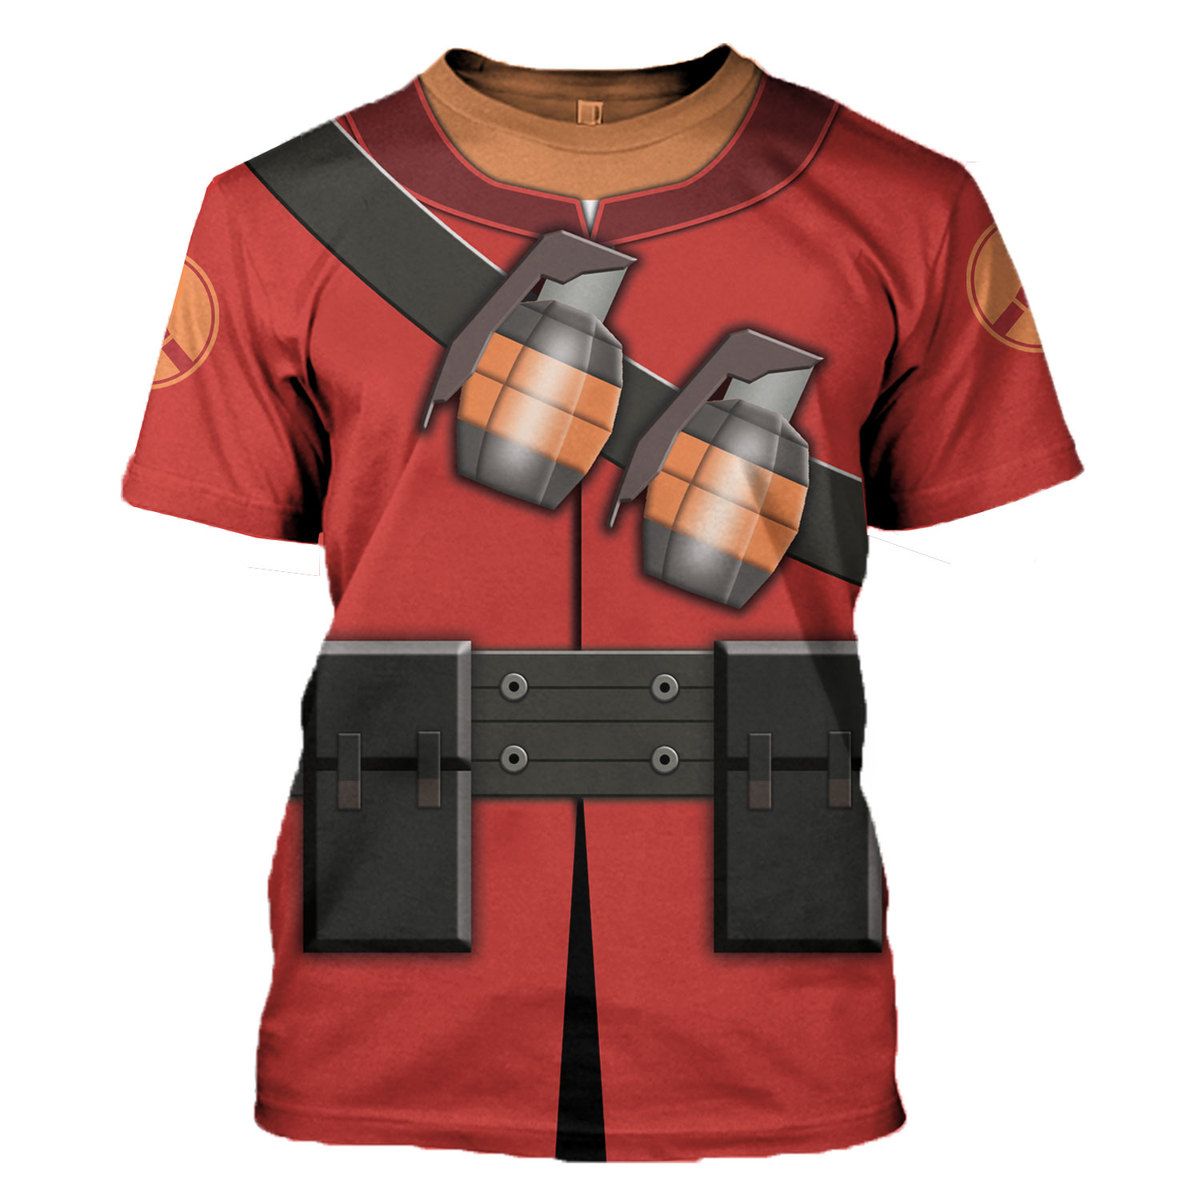 Soldier TF2 t-shirt